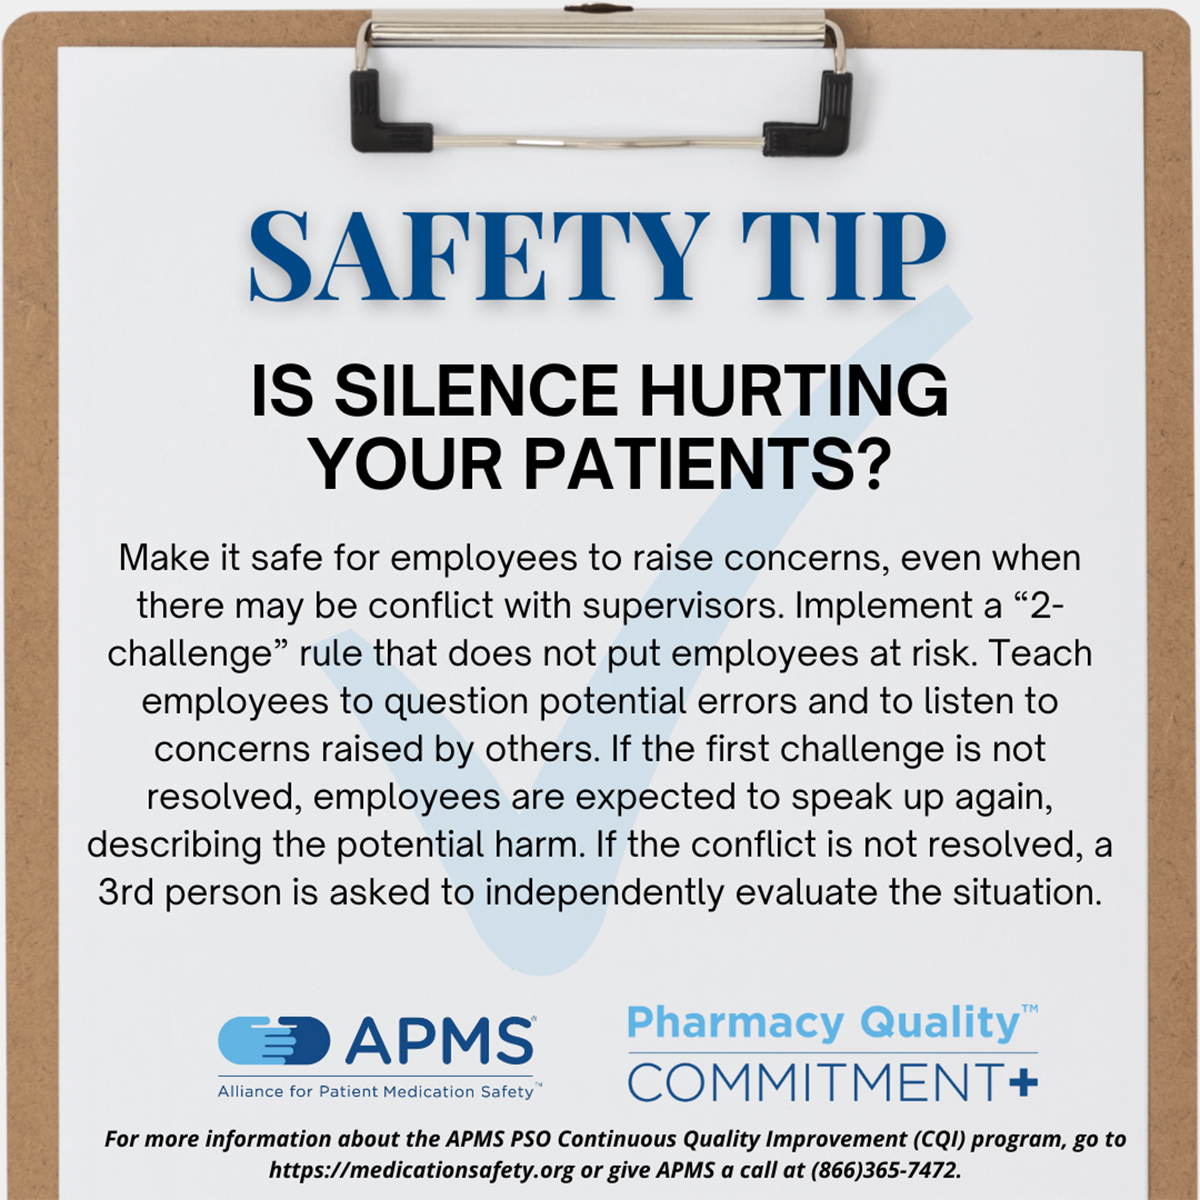 Here's your monthly #MedicationSafety Tip from the @APMS_PSO: Is Silence Hurting your Patients? For more information, or to get your Medication Safety and Continuous Quality Improvement (CQI) program started, go to medicationsafety.org/sign-up.php or give APMS a call at (866) 365-7472.